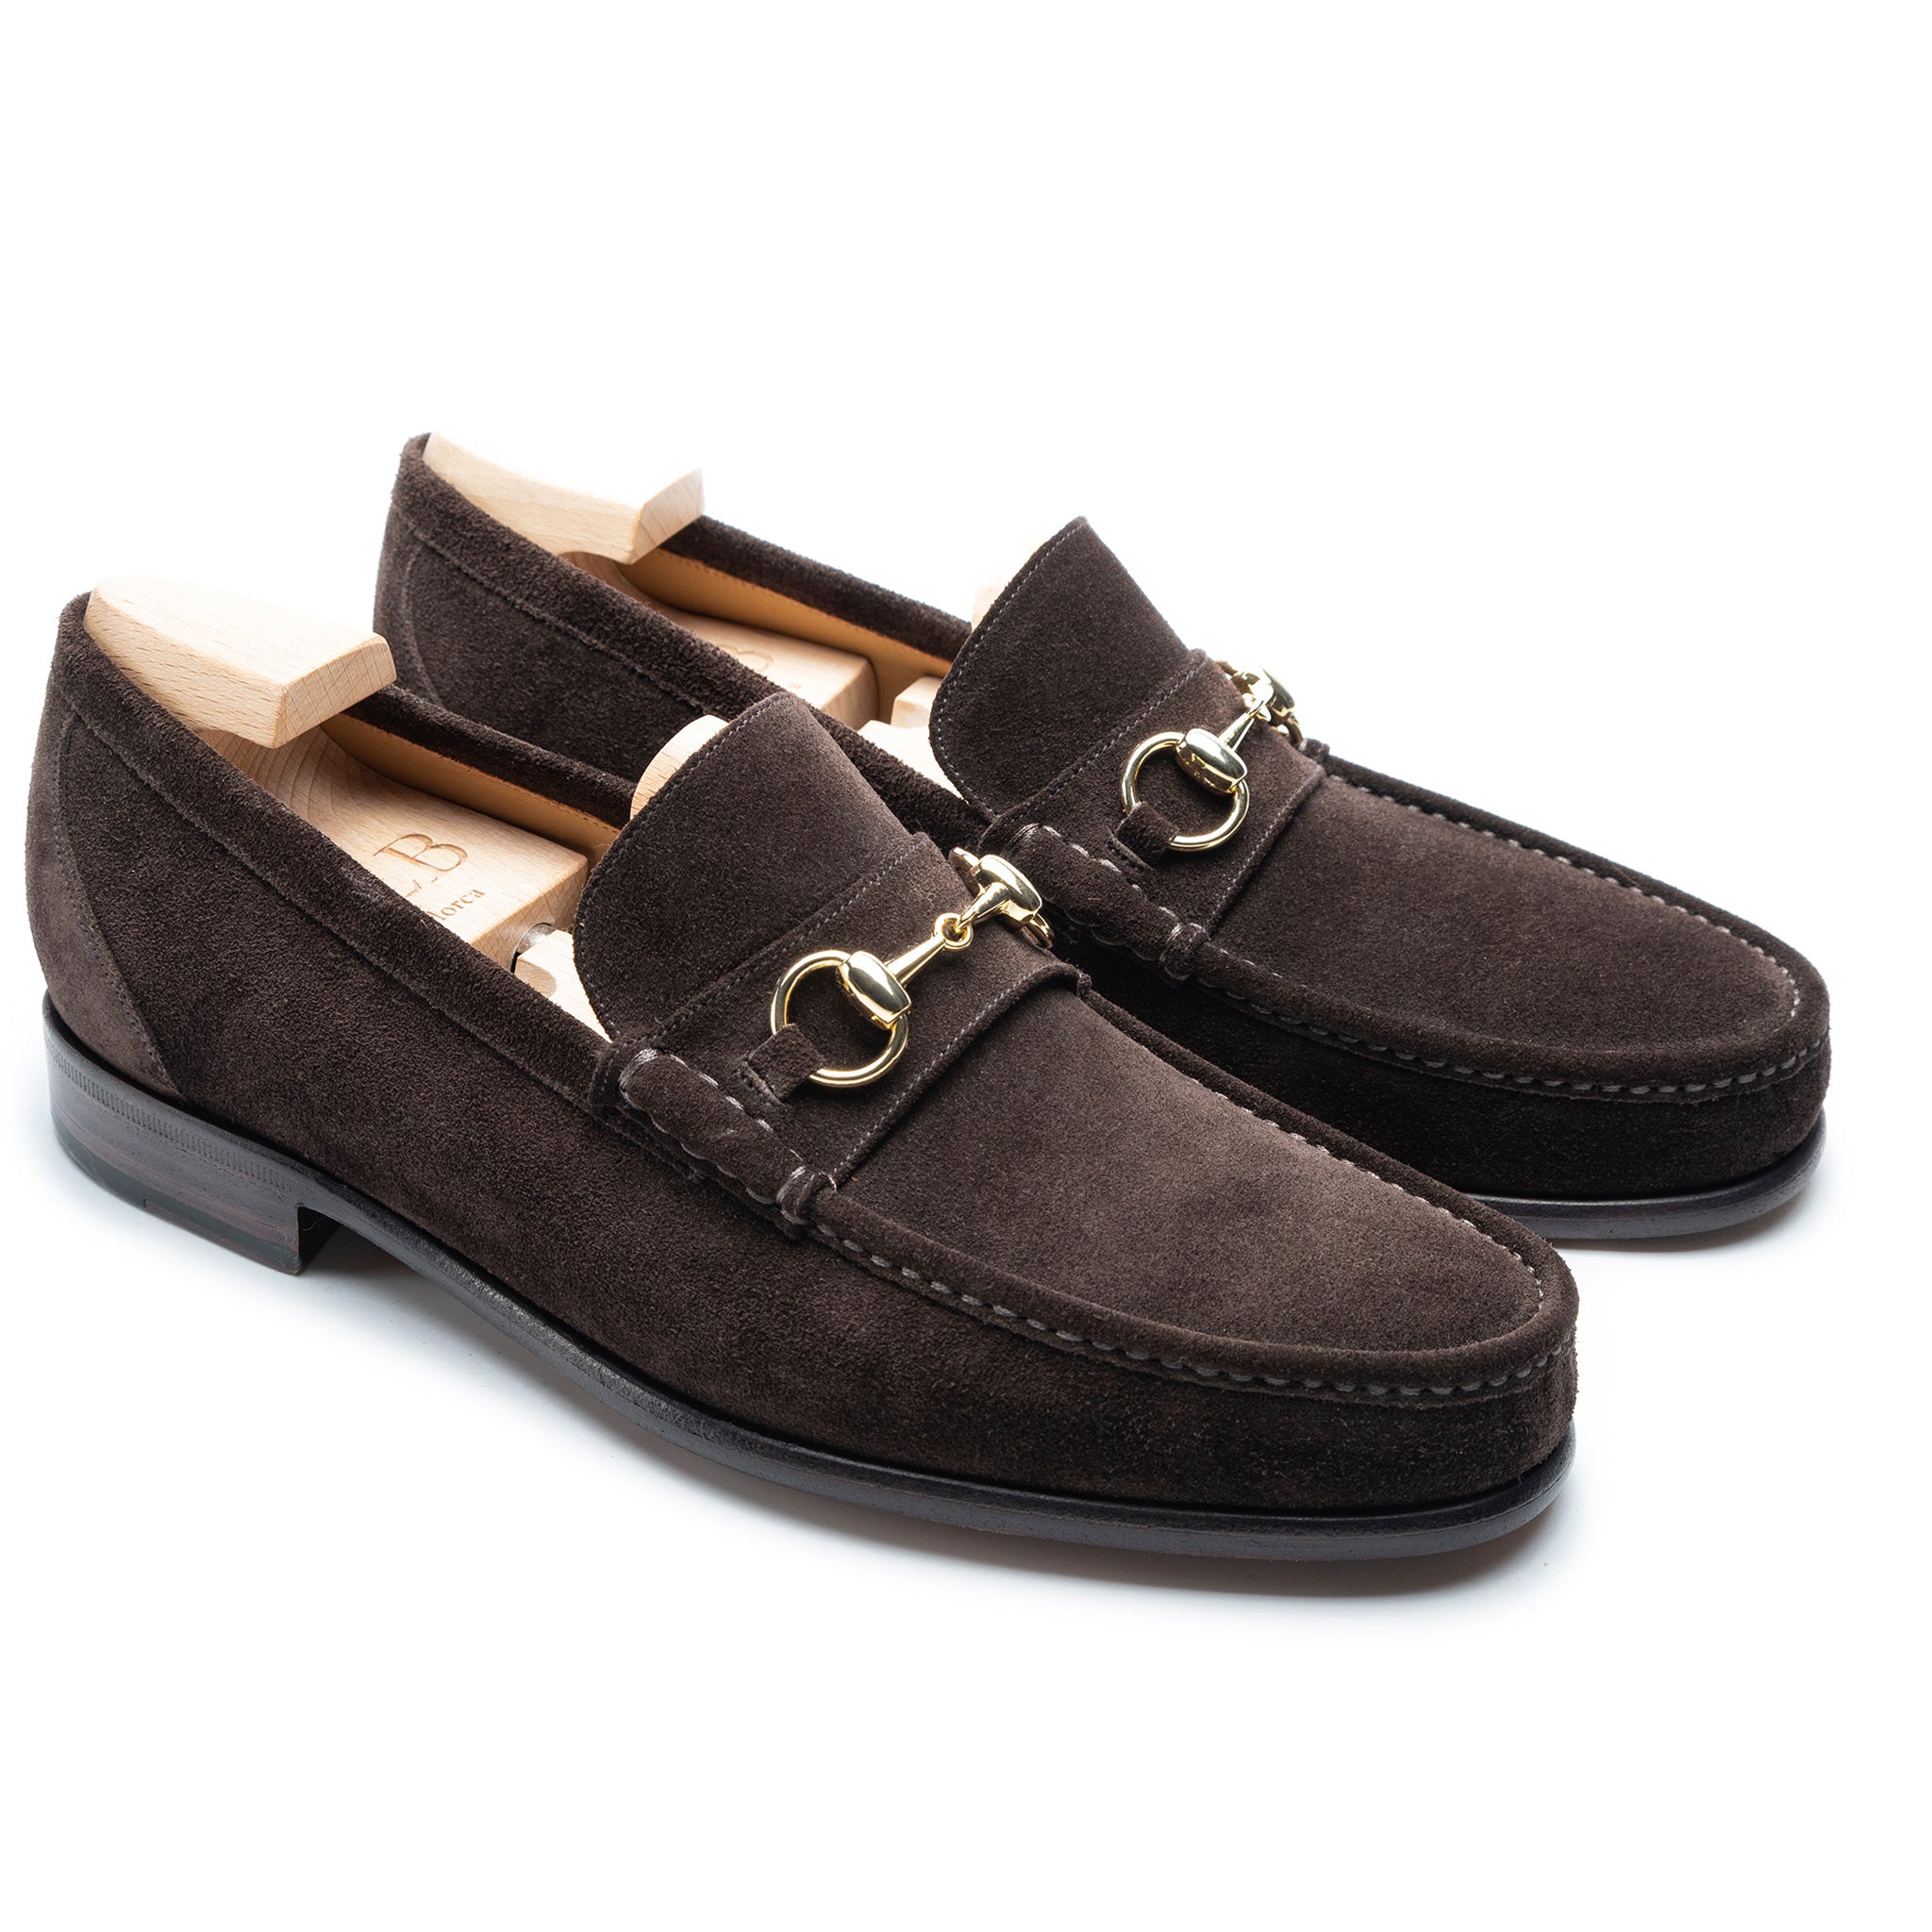 TLB Mallorca Oxford loafers | Men's Oxford shoes | Model 2508 suede brown